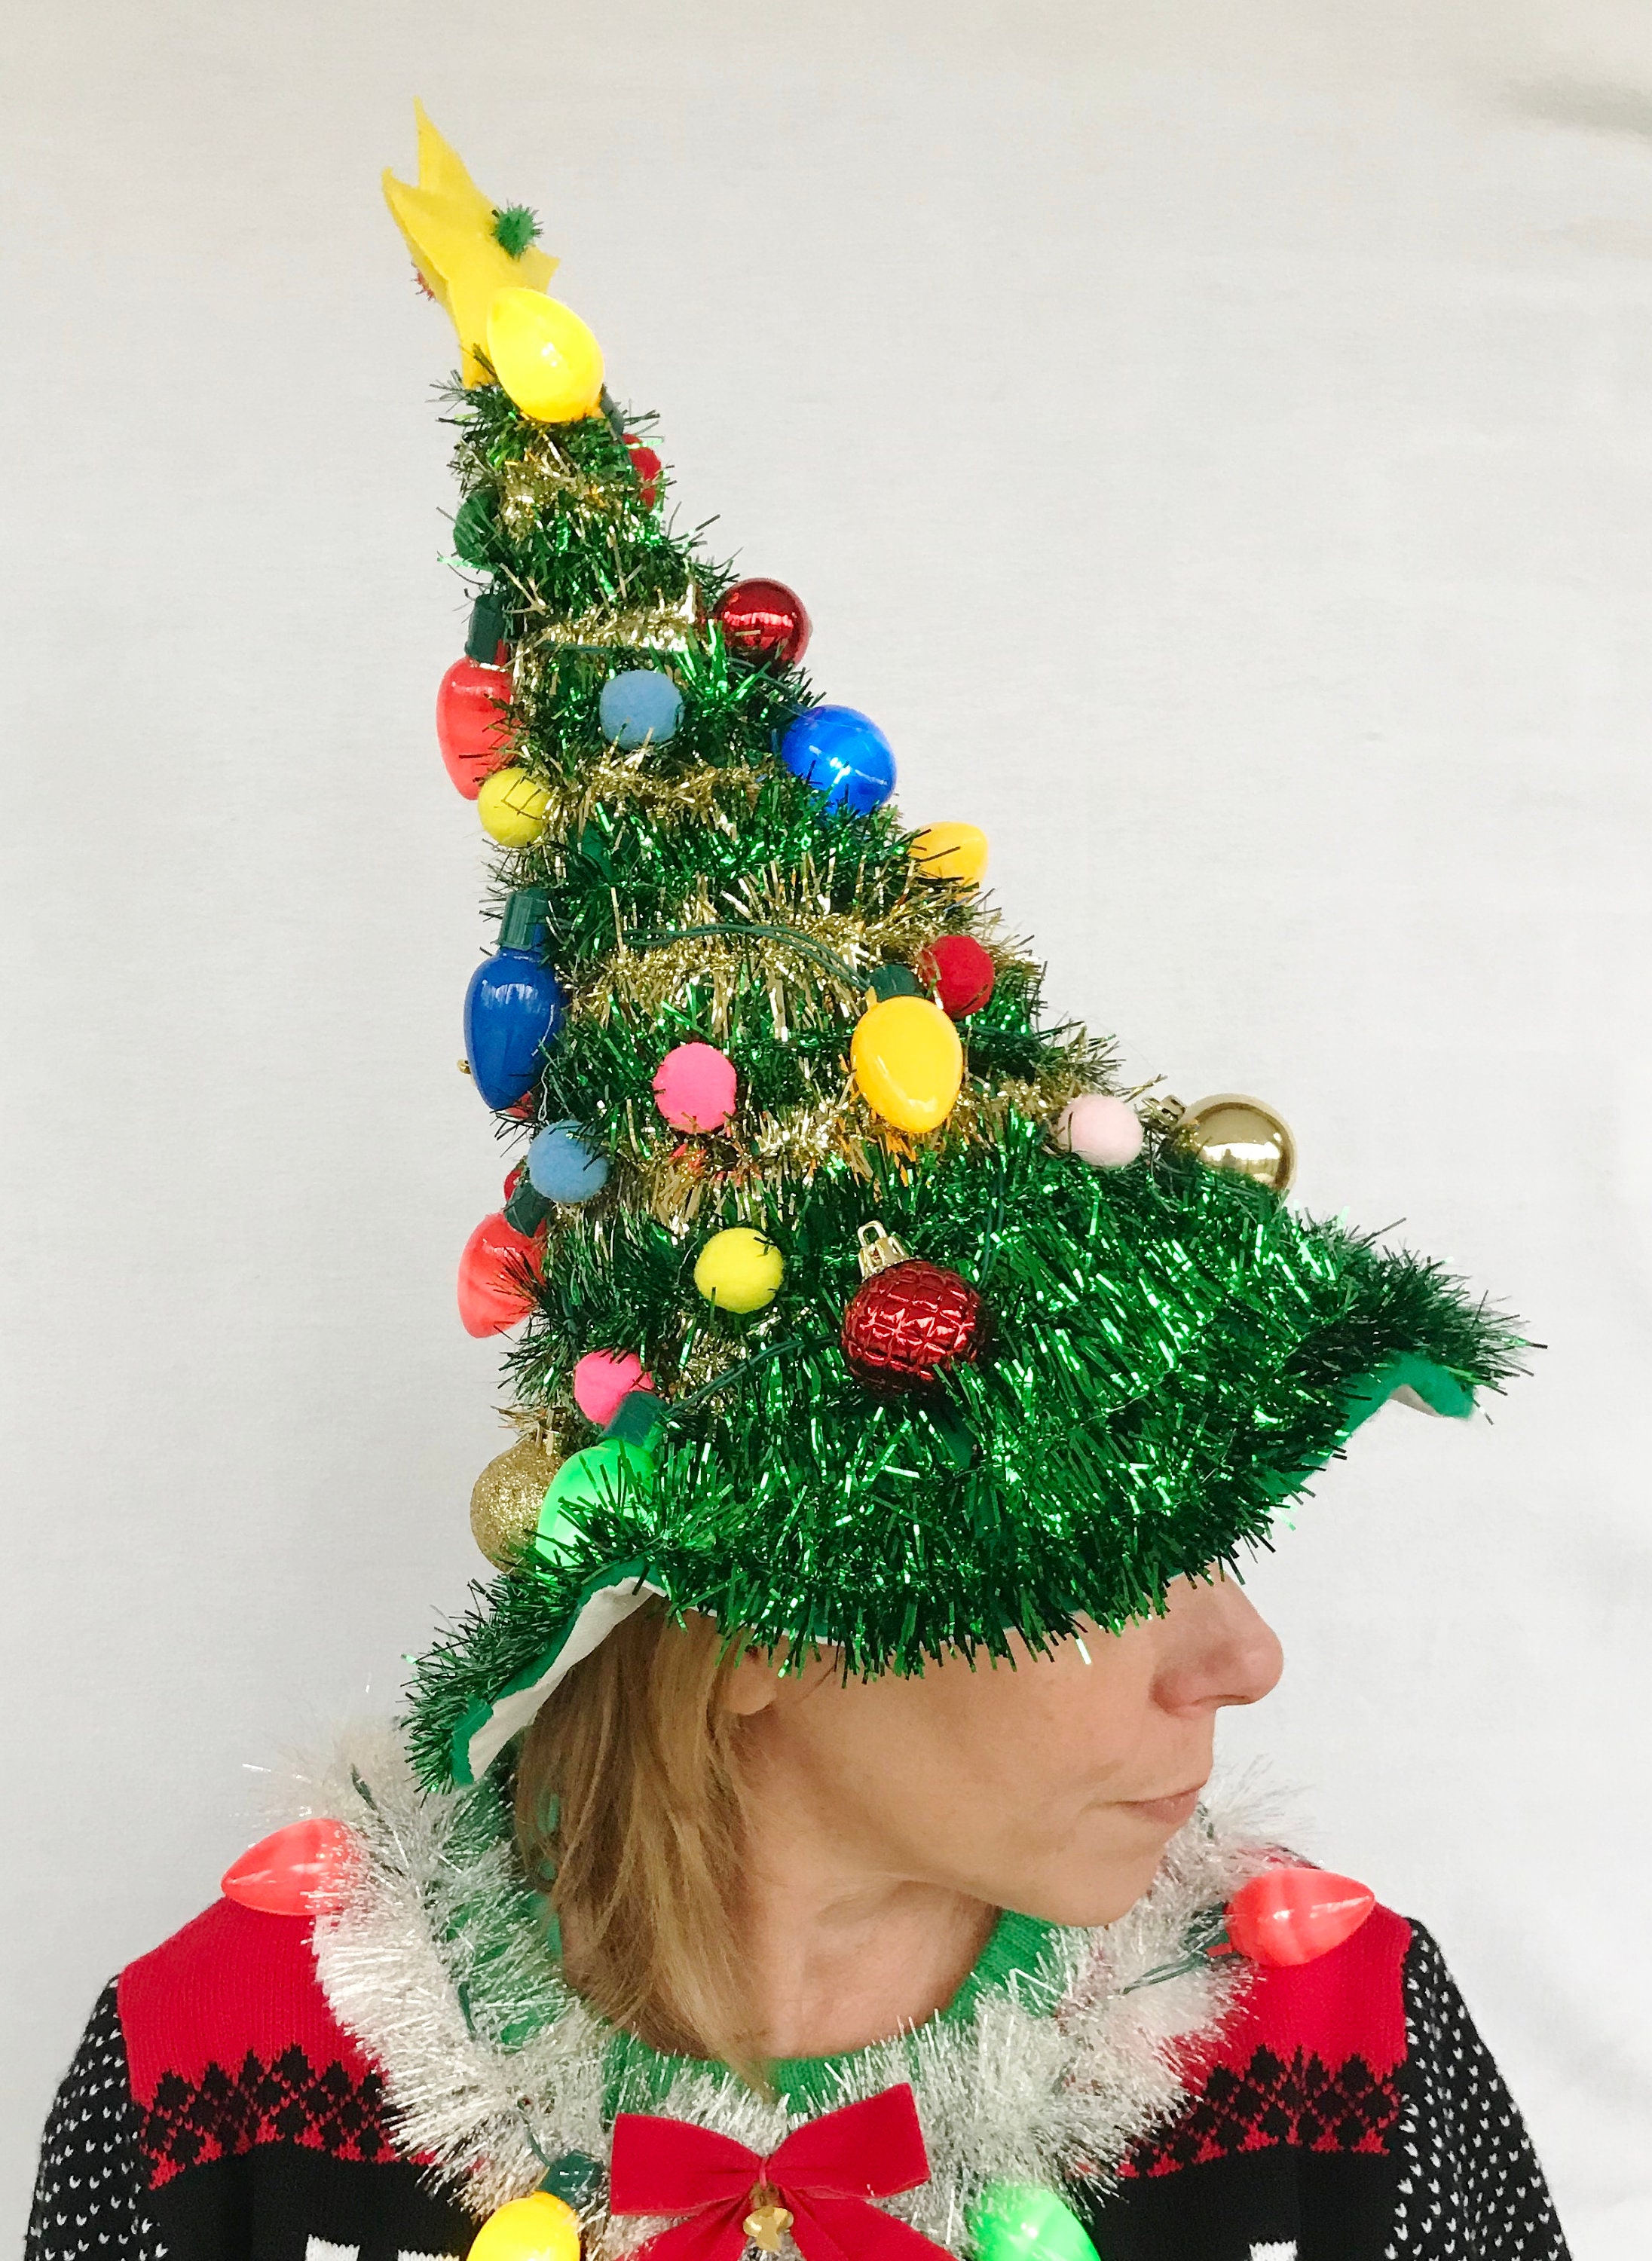 UGLY CHRISTMAS TREE Hat. Light Up. X-mas Sweater Contest | Etsy